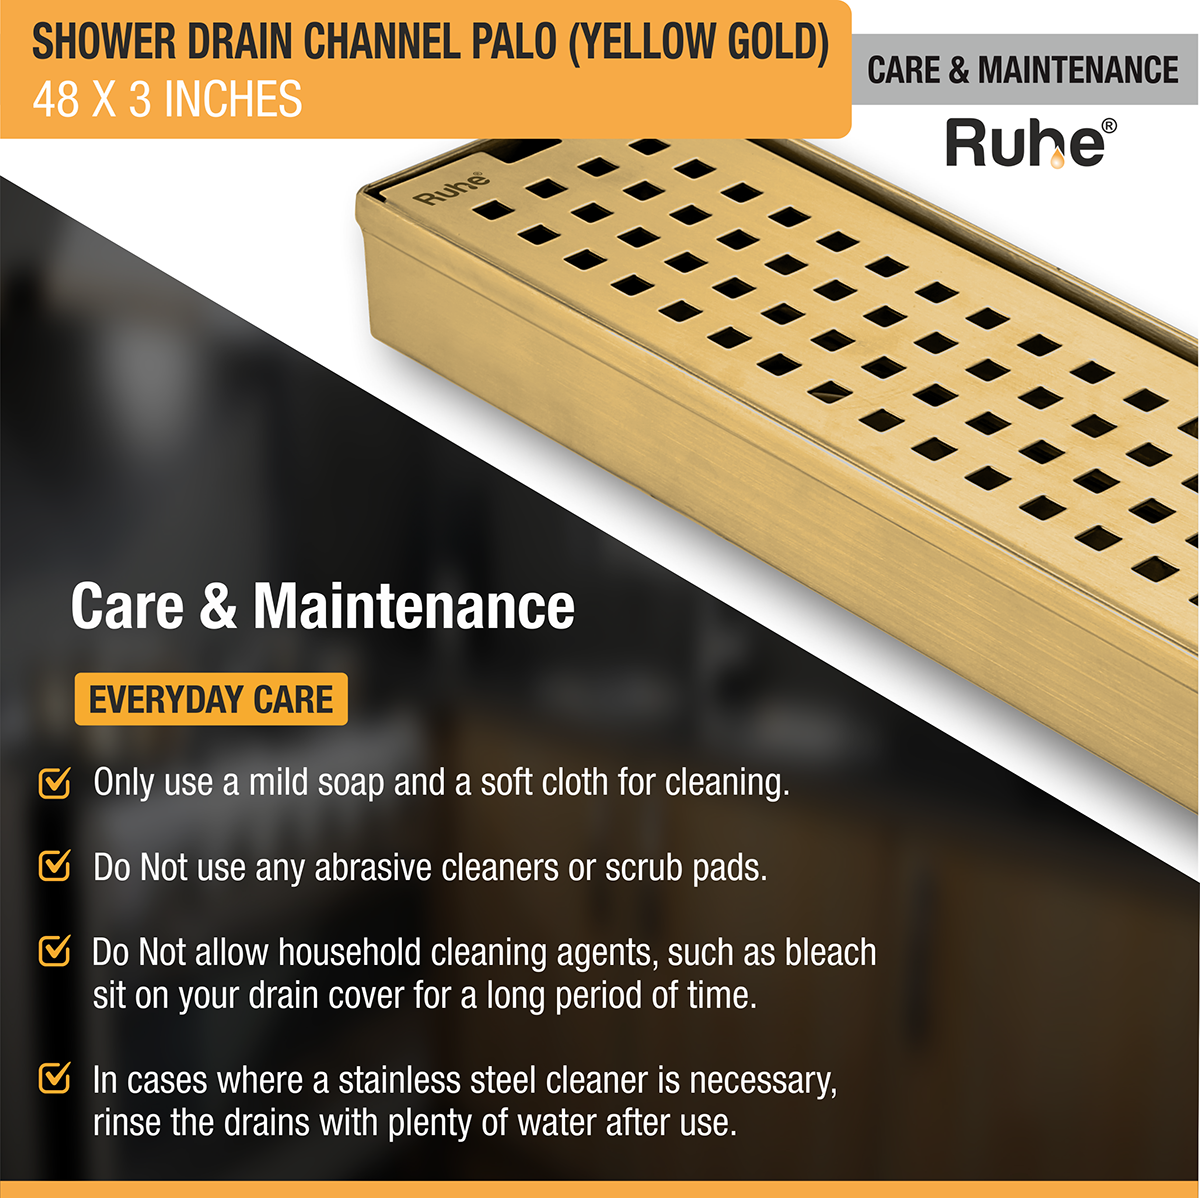 Palo Shower Drain Channel (48 x 3 Inches) YELLOW GOLD care and maintenance